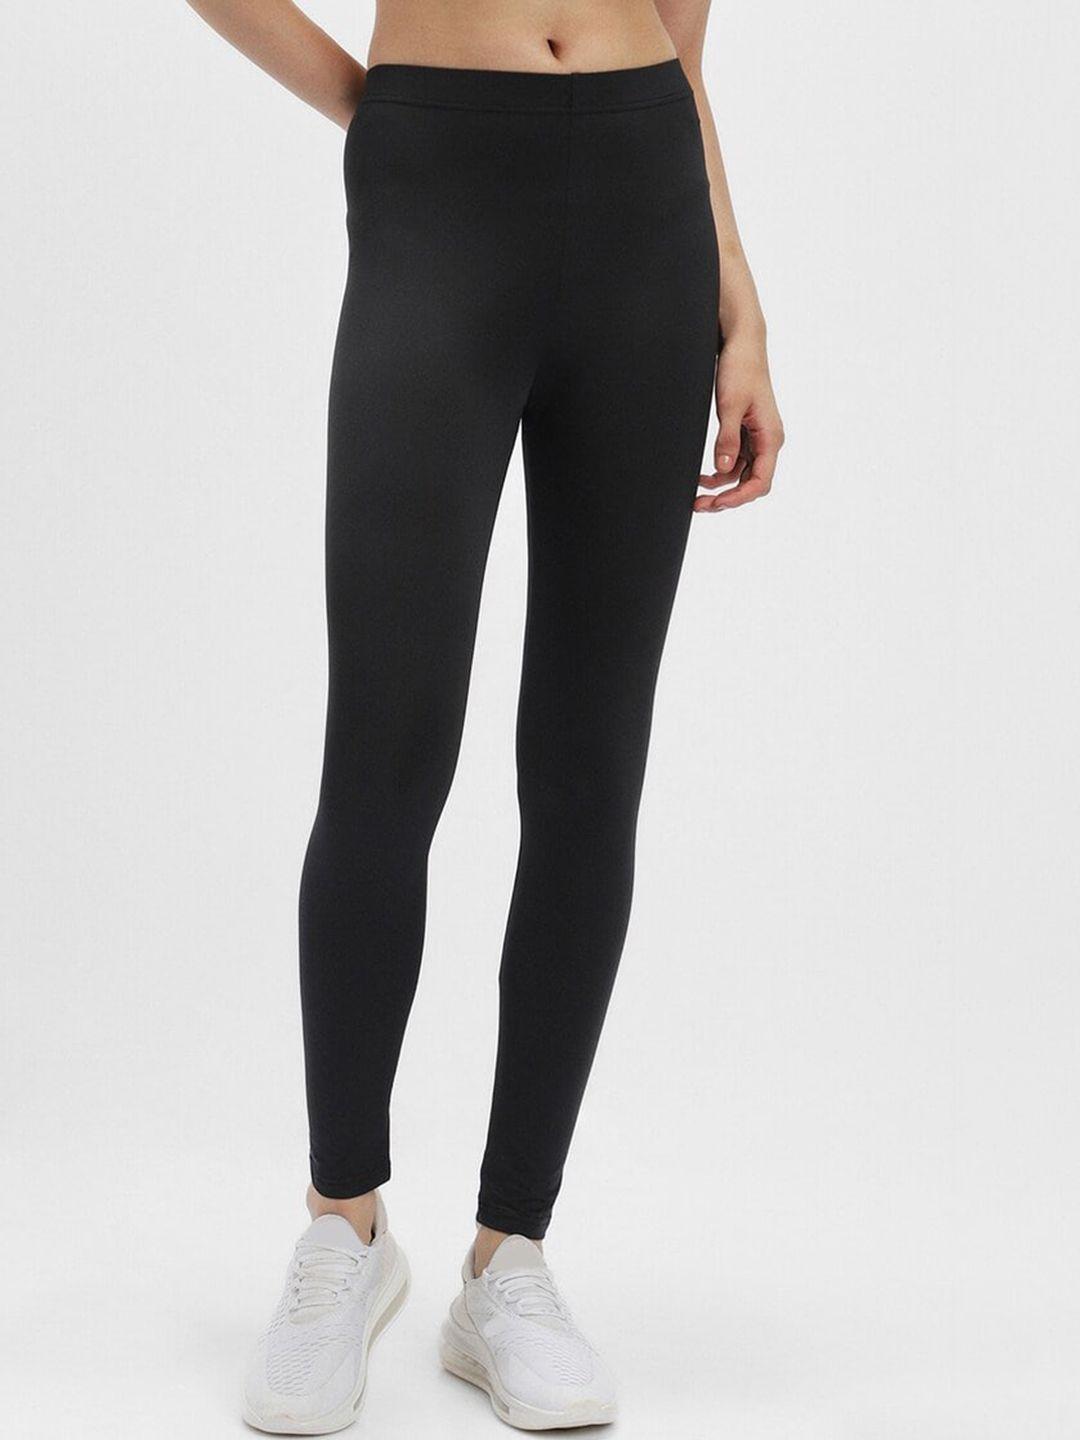 forever-21-women-mid-rise-ankle-length-tights